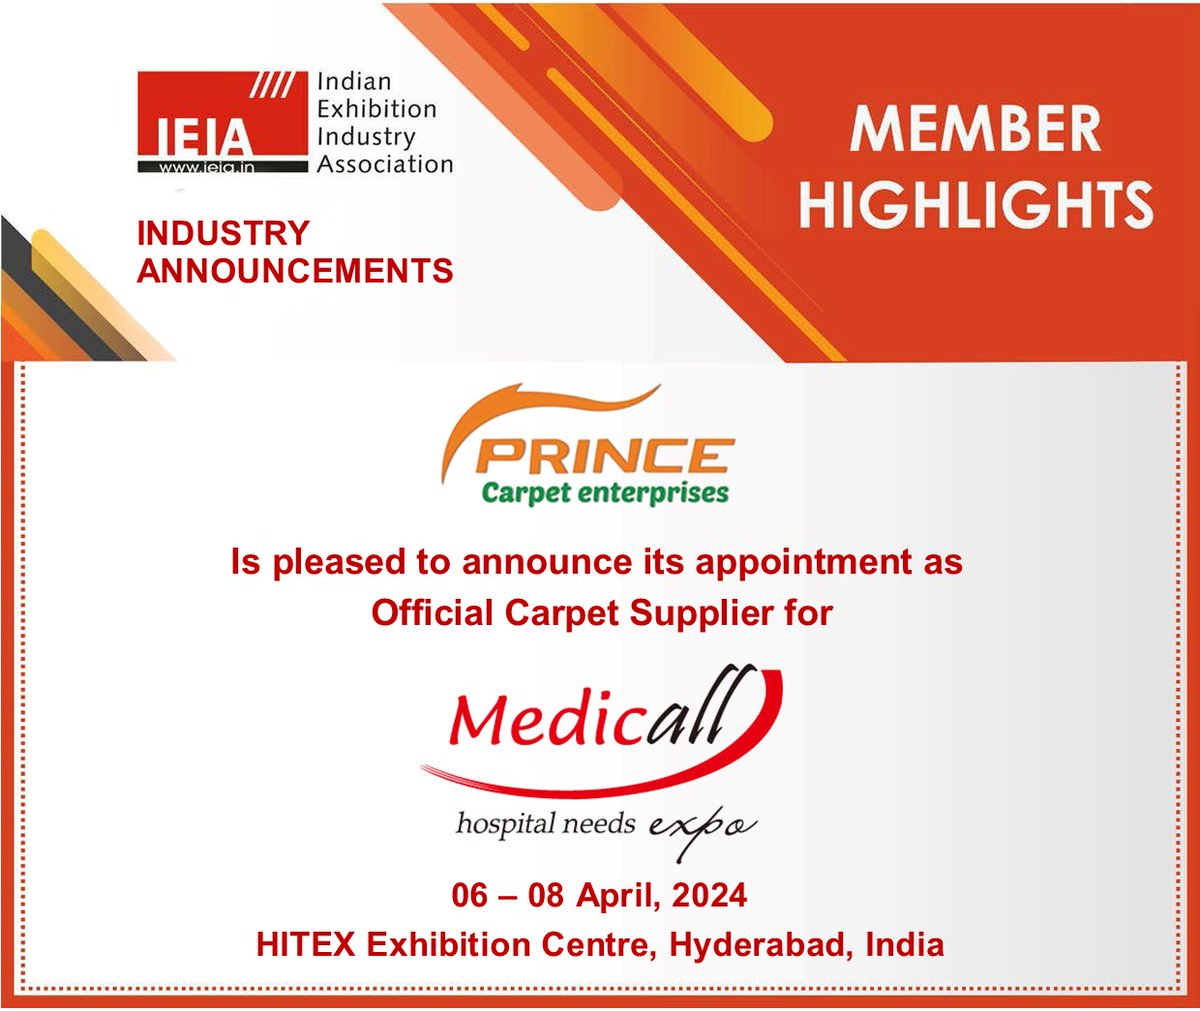 𝗜𝗡𝗗𝗨𝗦𝗧𝗥𝗬 𝗔𝗡𝗡𝗢𝗨𝗡𝗖𝗘𝗠𝗘𝗡𝗧- IEIA Member- Prince Carpet Enterprises has been appointed as official Carpet Supplier for Medicall Hyderabad 2024, to be held in HITEX Exhibition Center , Hyderabad, India.
For more details: princecarpet.in
#PrinceCarpet #IEIA